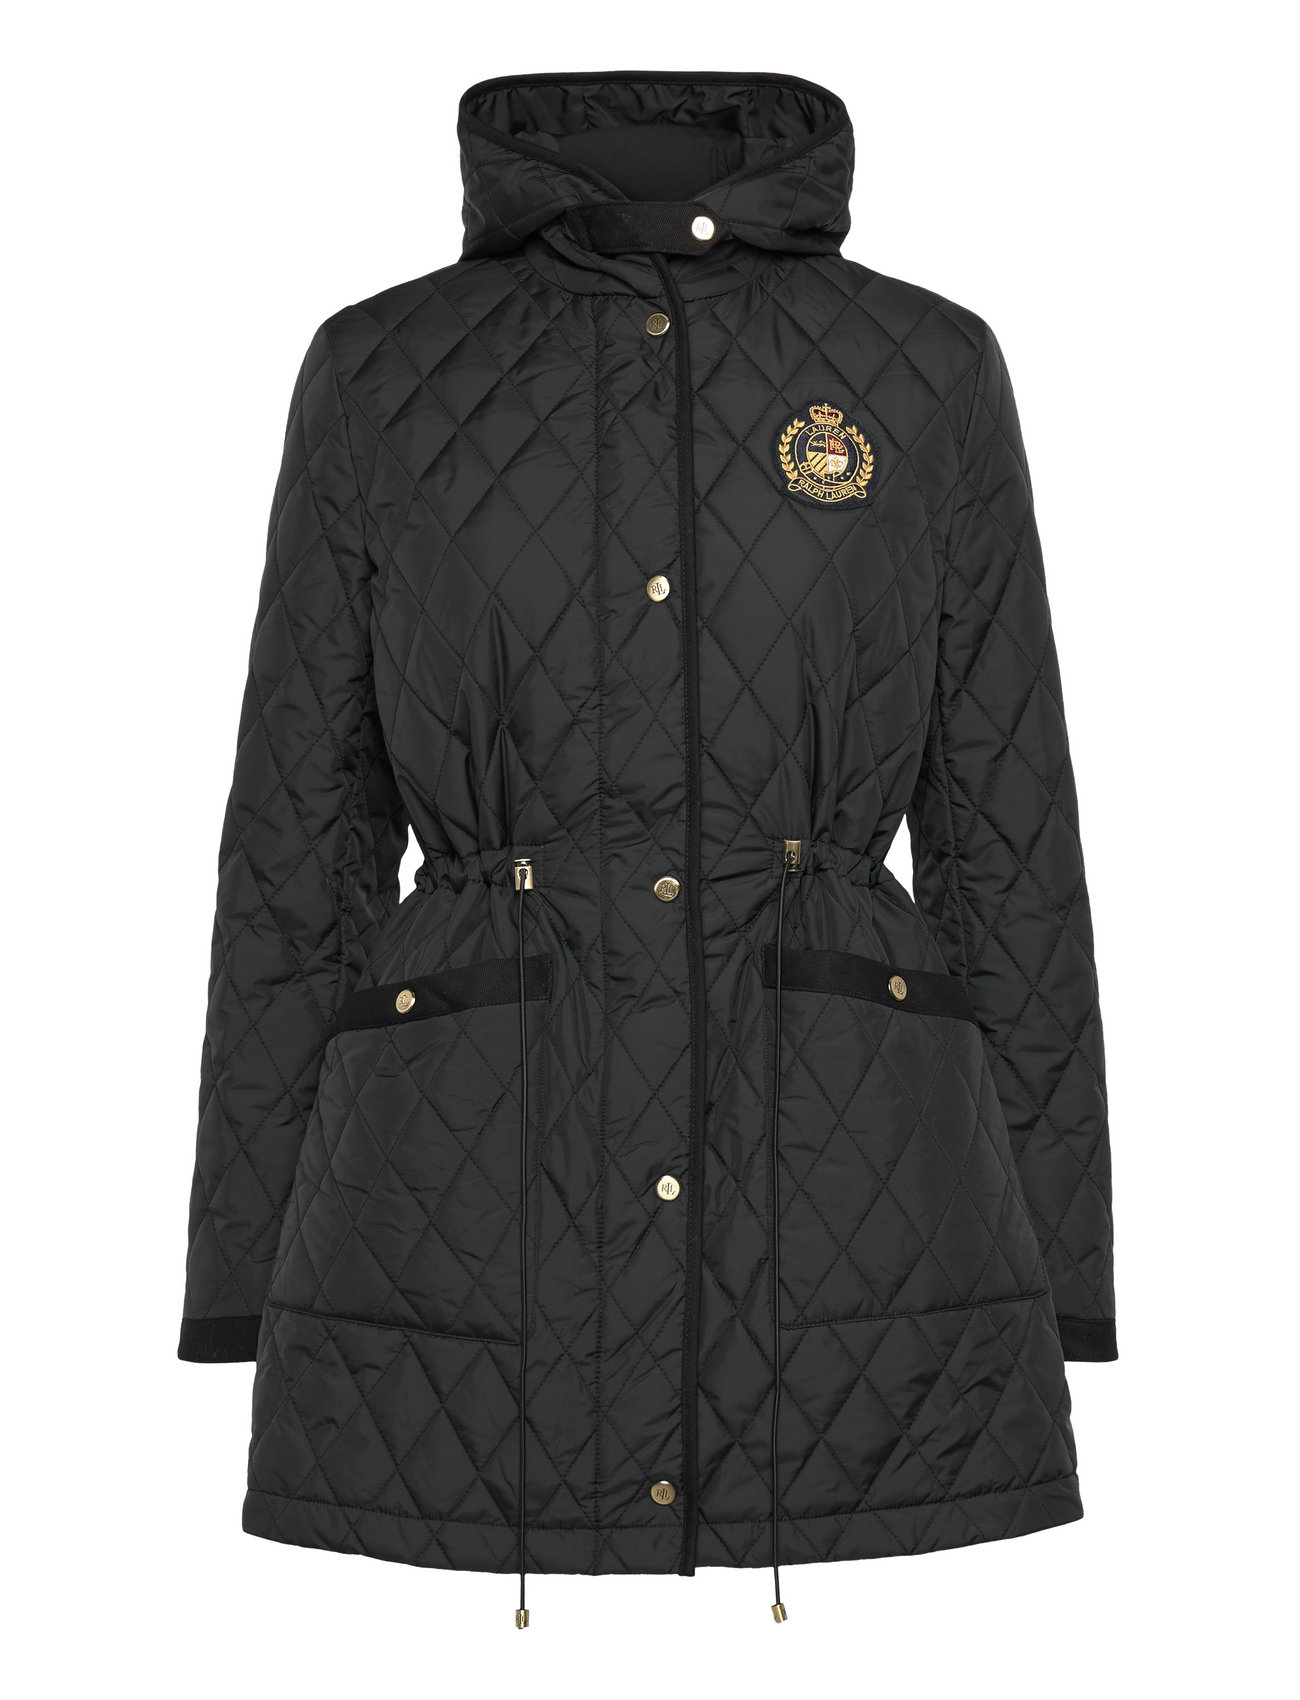 Lauren Ralph Lauren Crest-patch Quilted Jacket - 319 €. Buy Quilted jackets  from Lauren Ralph Lauren online at . Fast delivery and easy returns